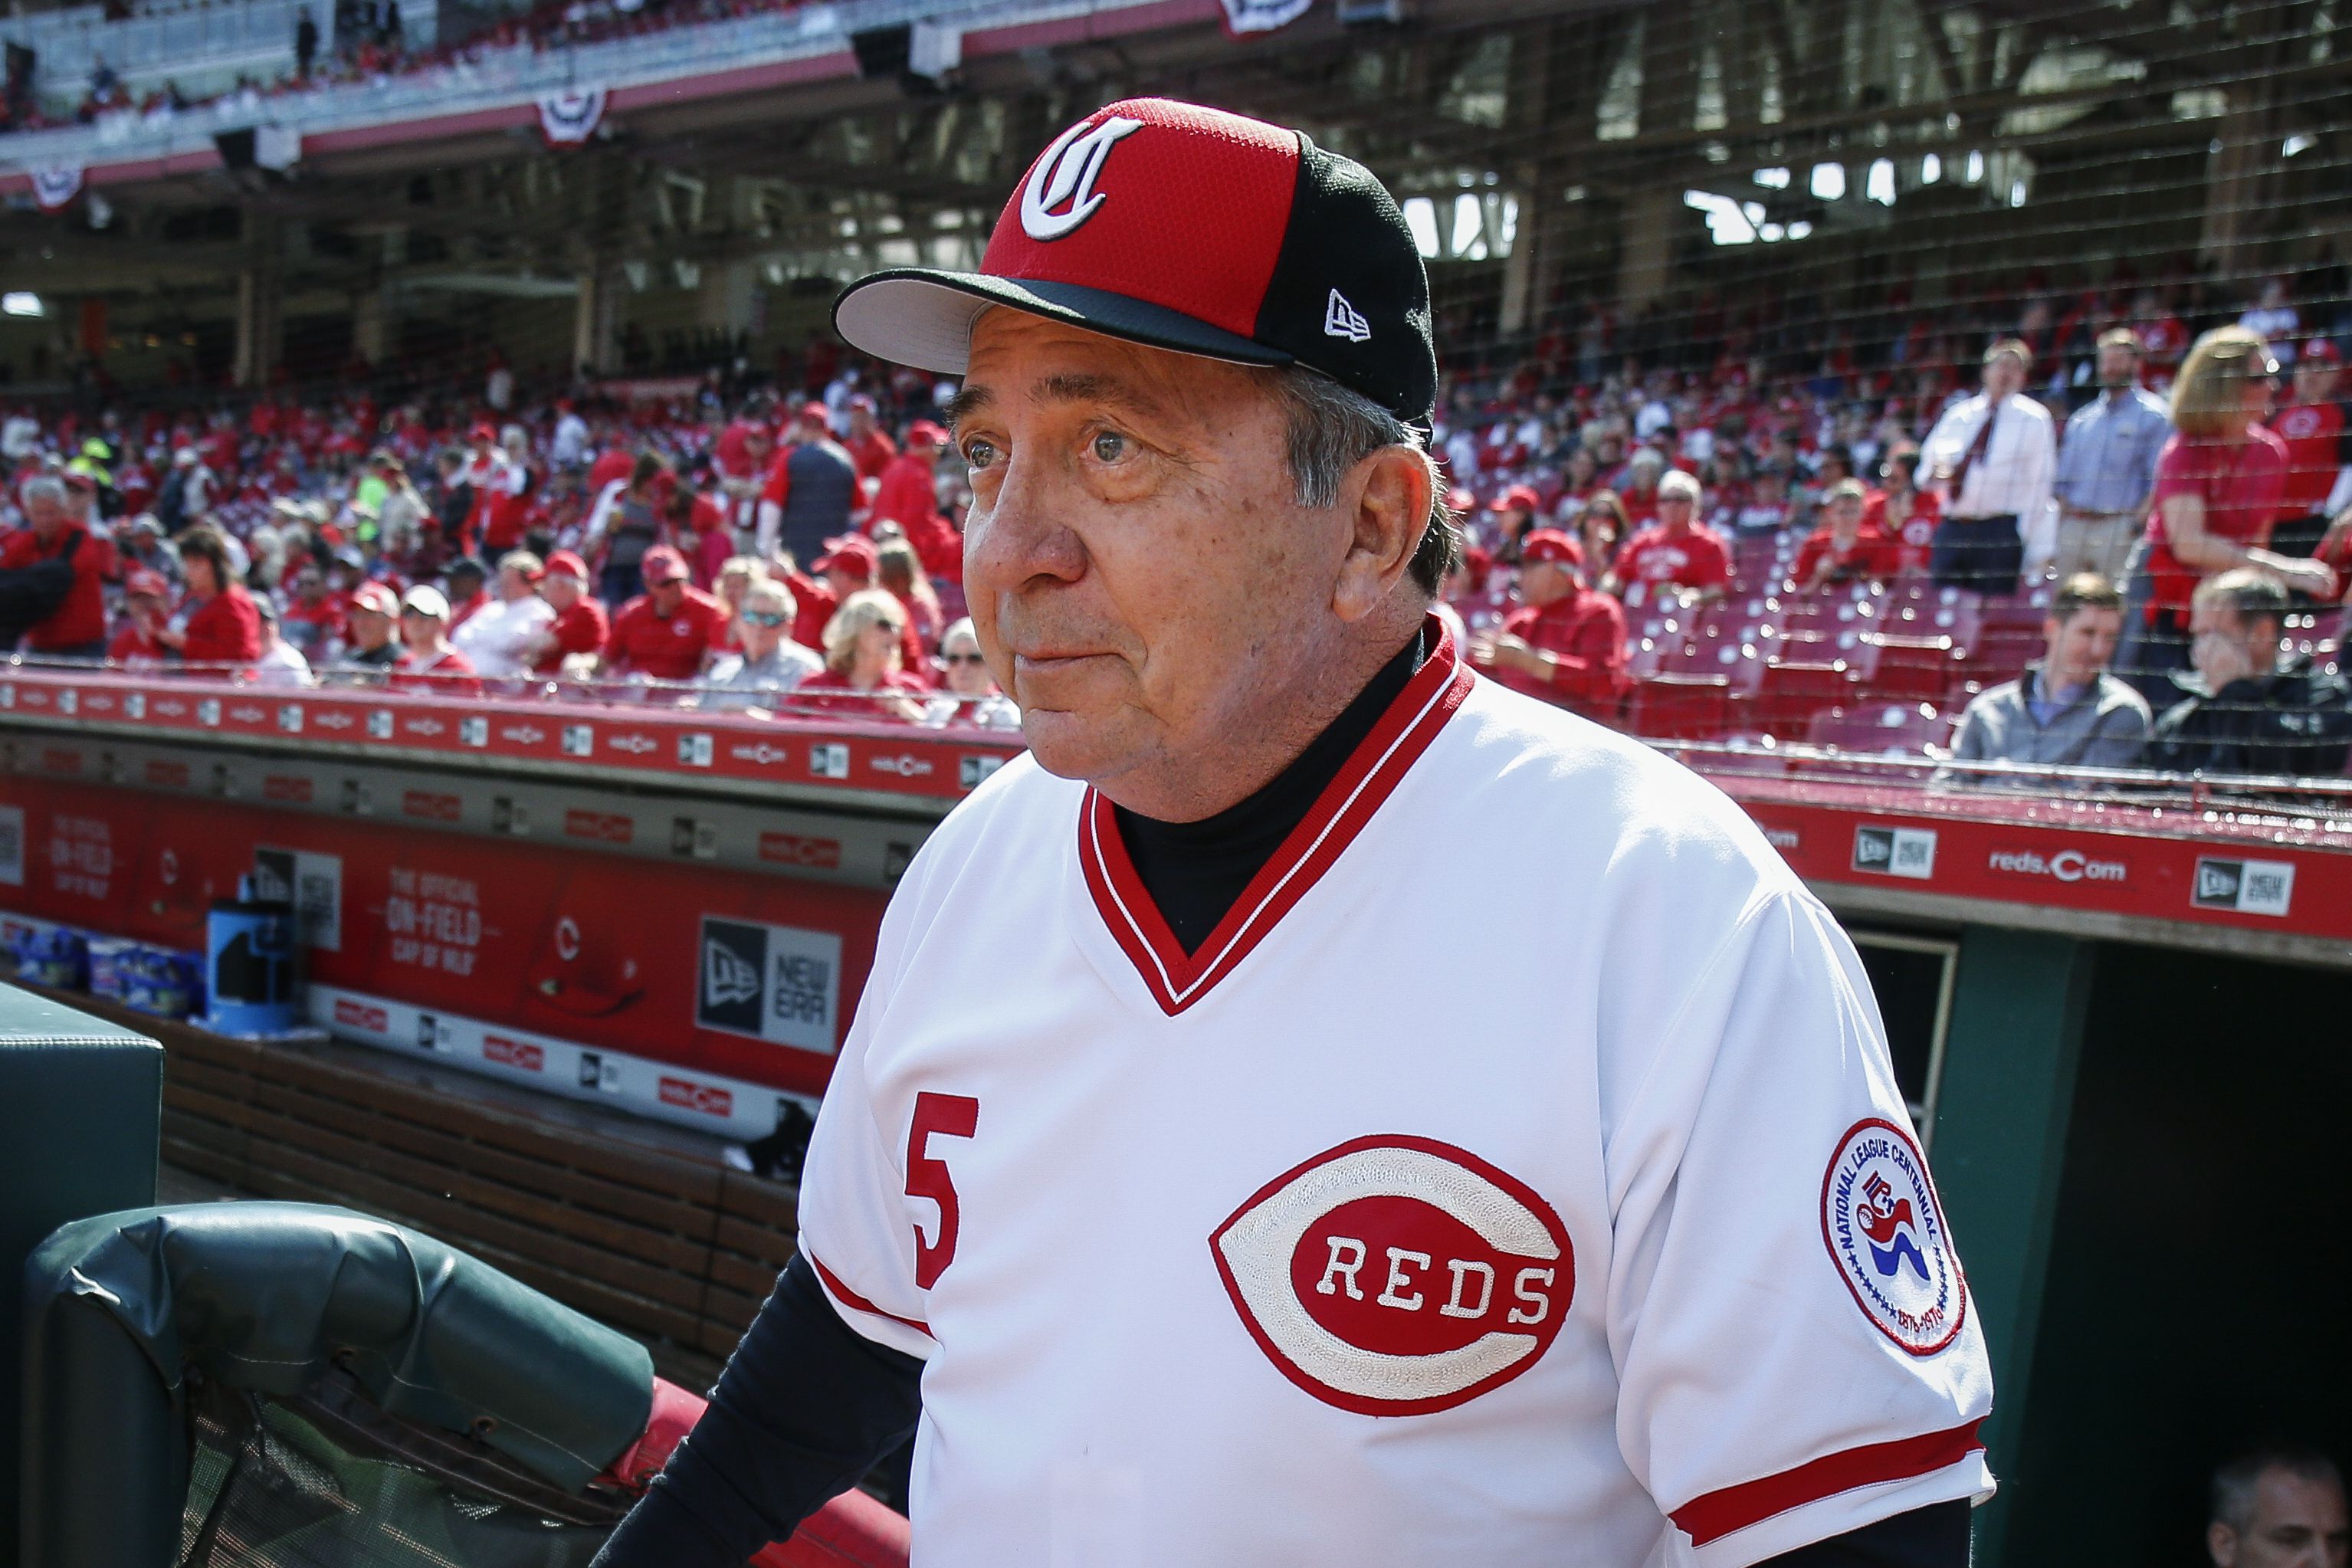 Johnny Bench: Cincinnati Reds catcher's jersey sells for $116,000 at auction